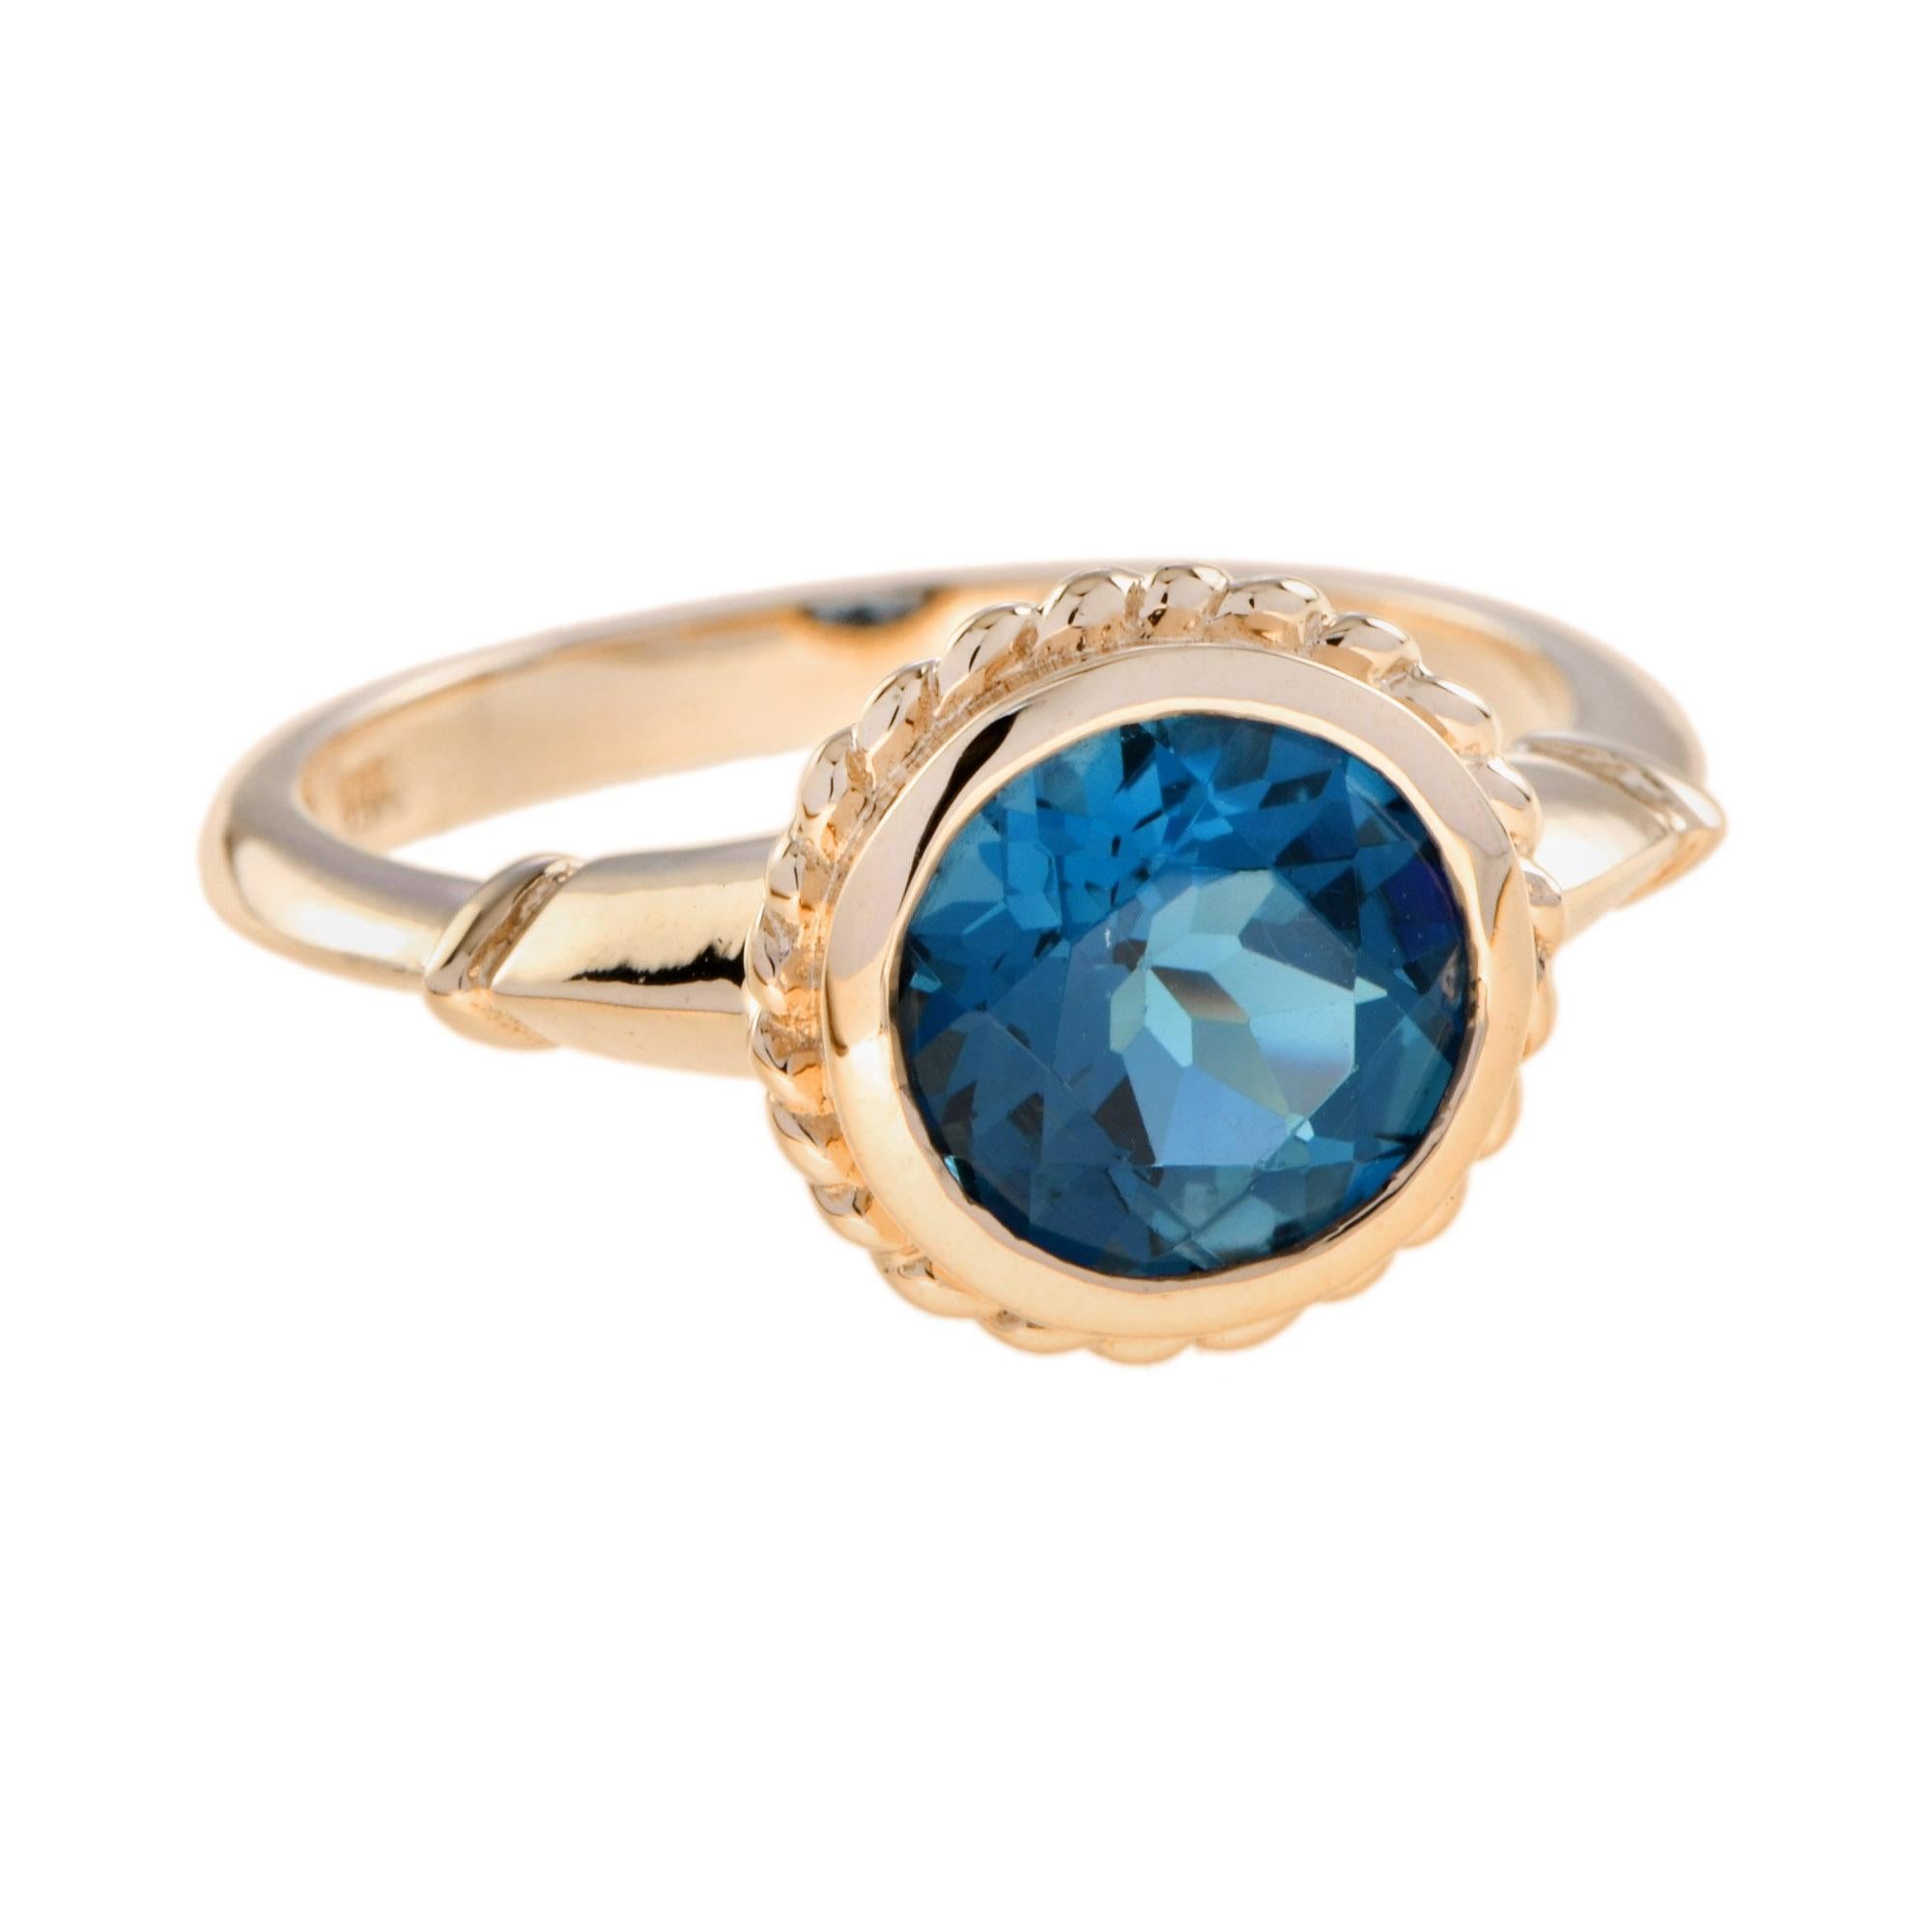 A natural 2.25 carat round cut London blue topaz is bezel set in a vintage inspired design. This classic ring is a timeless sentiment to be treasured for generations.

Ring Information
Style: Vintage
Metal: 9K Yellow Gold
Total weight: 3.10 g.